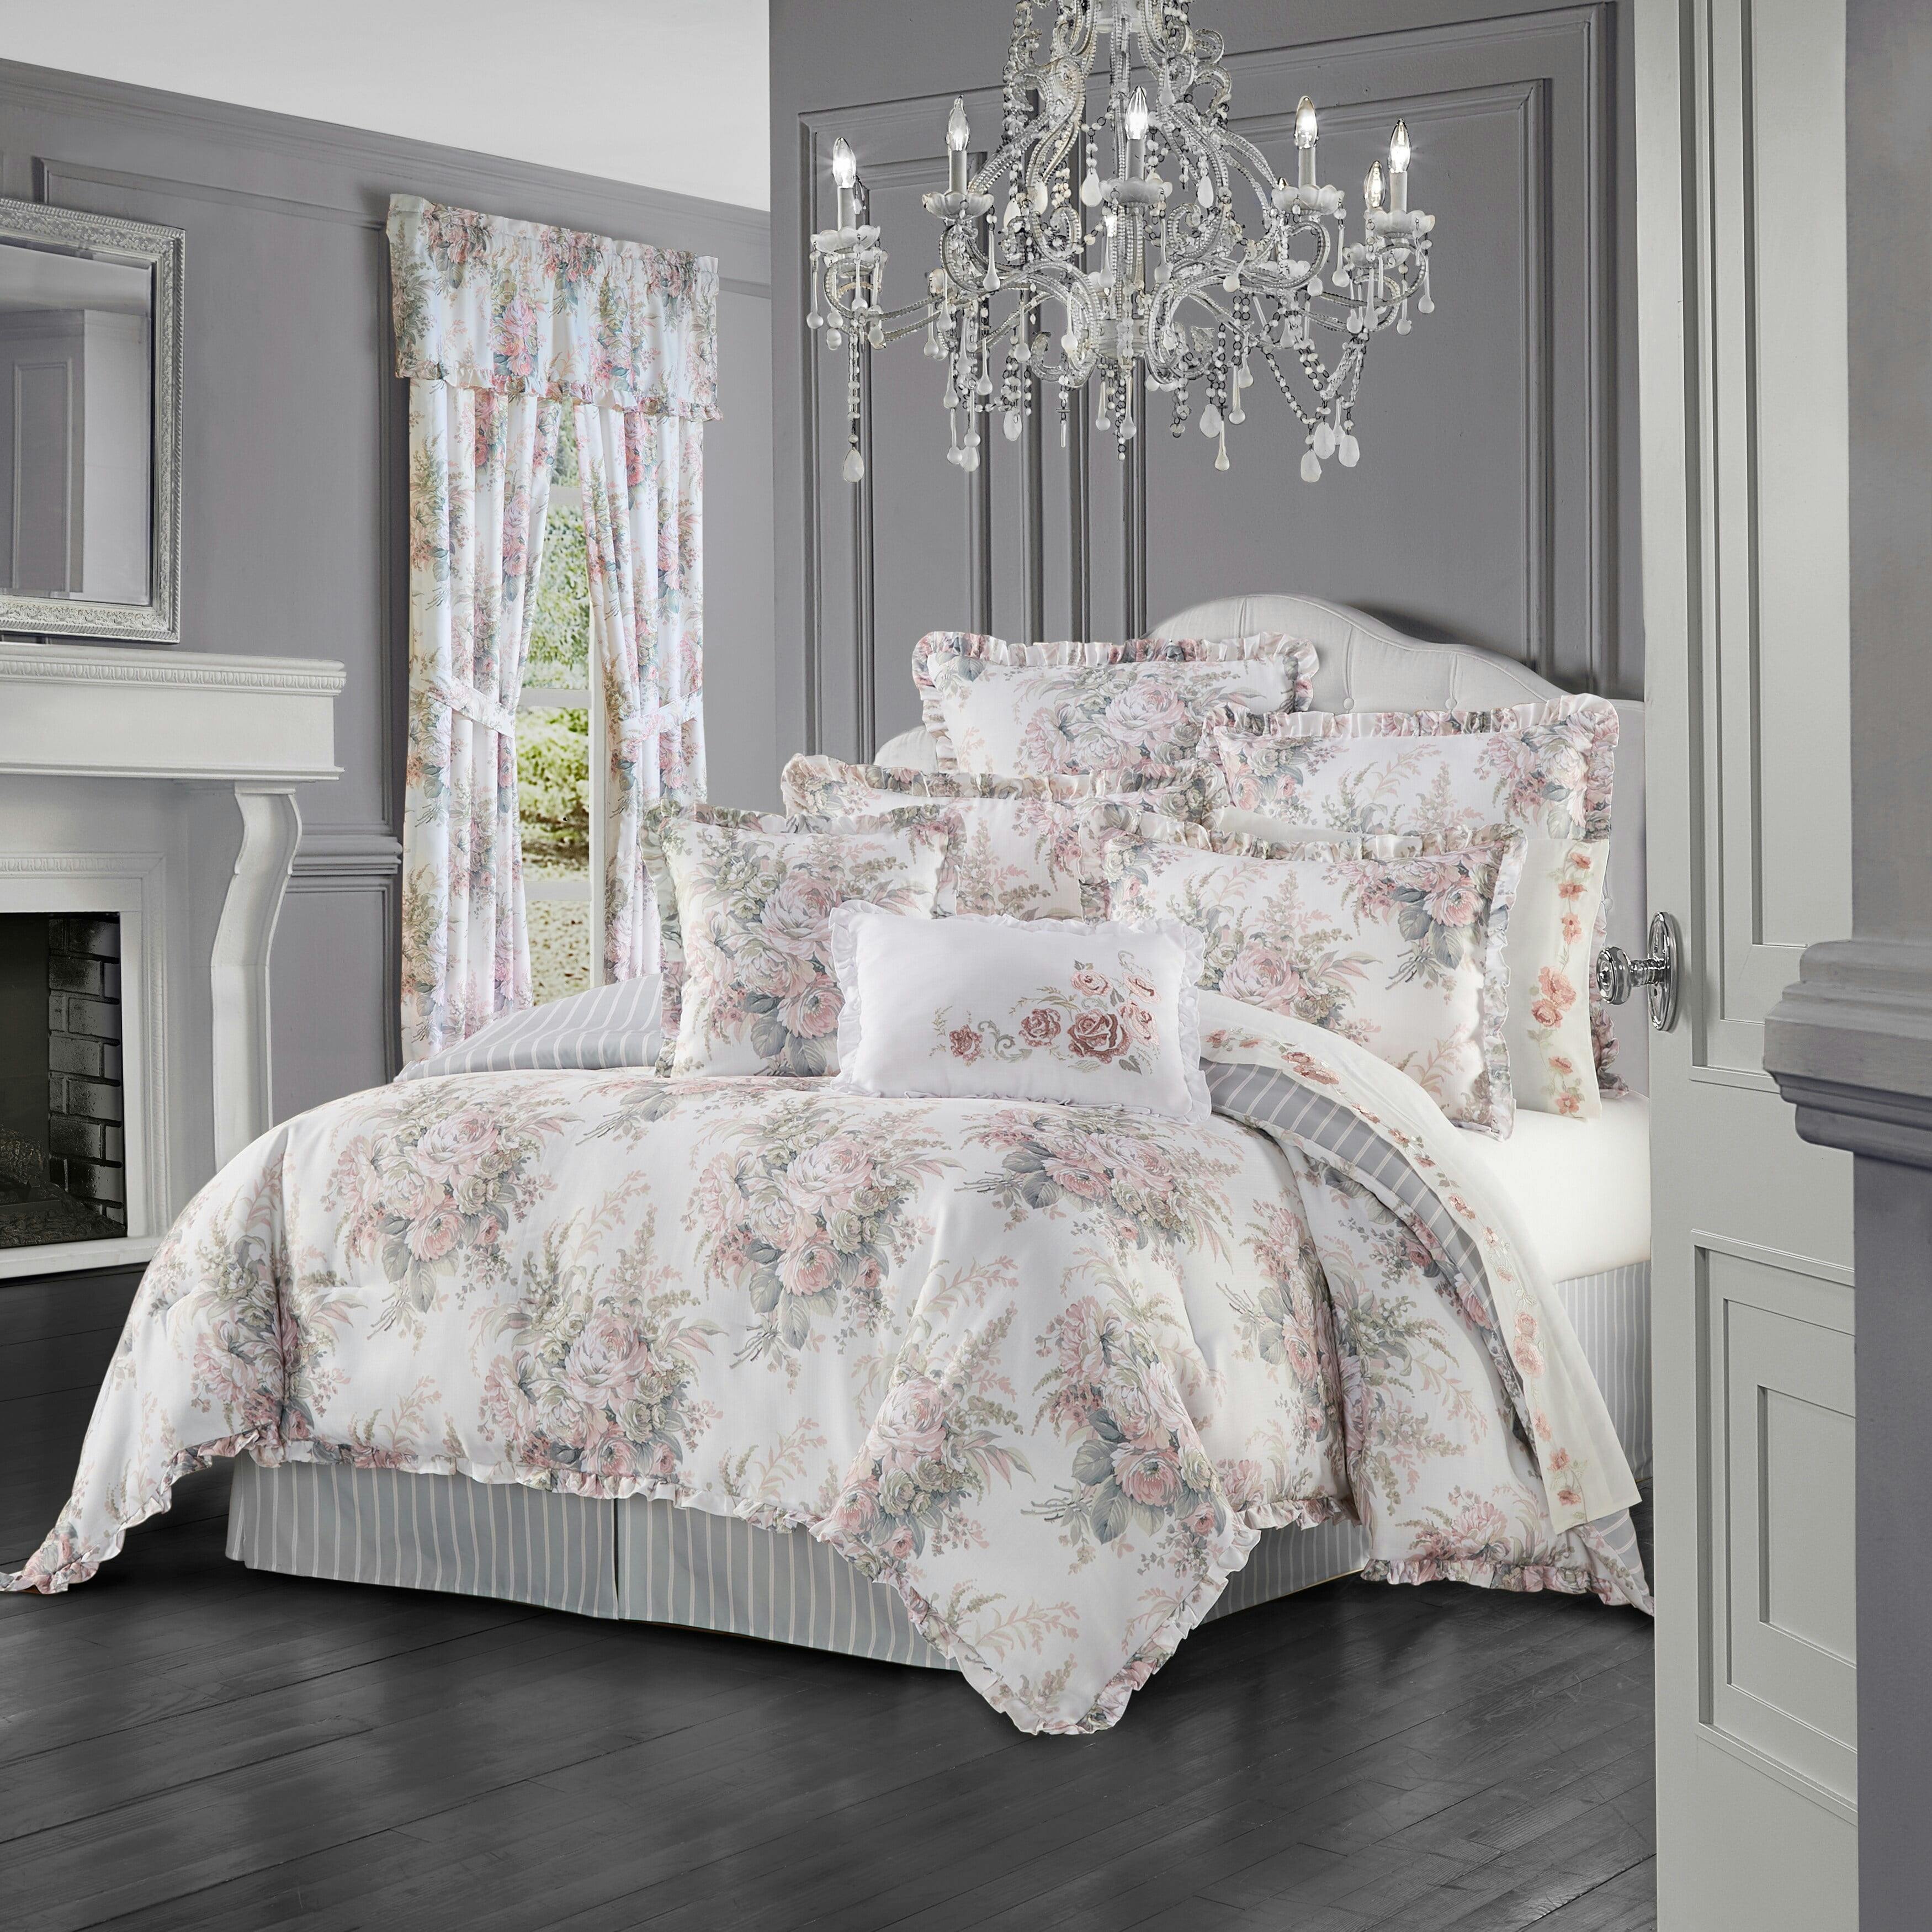 Estelle Blush Queen Comforter Set with Ruffled Edges and Shadow Stripe